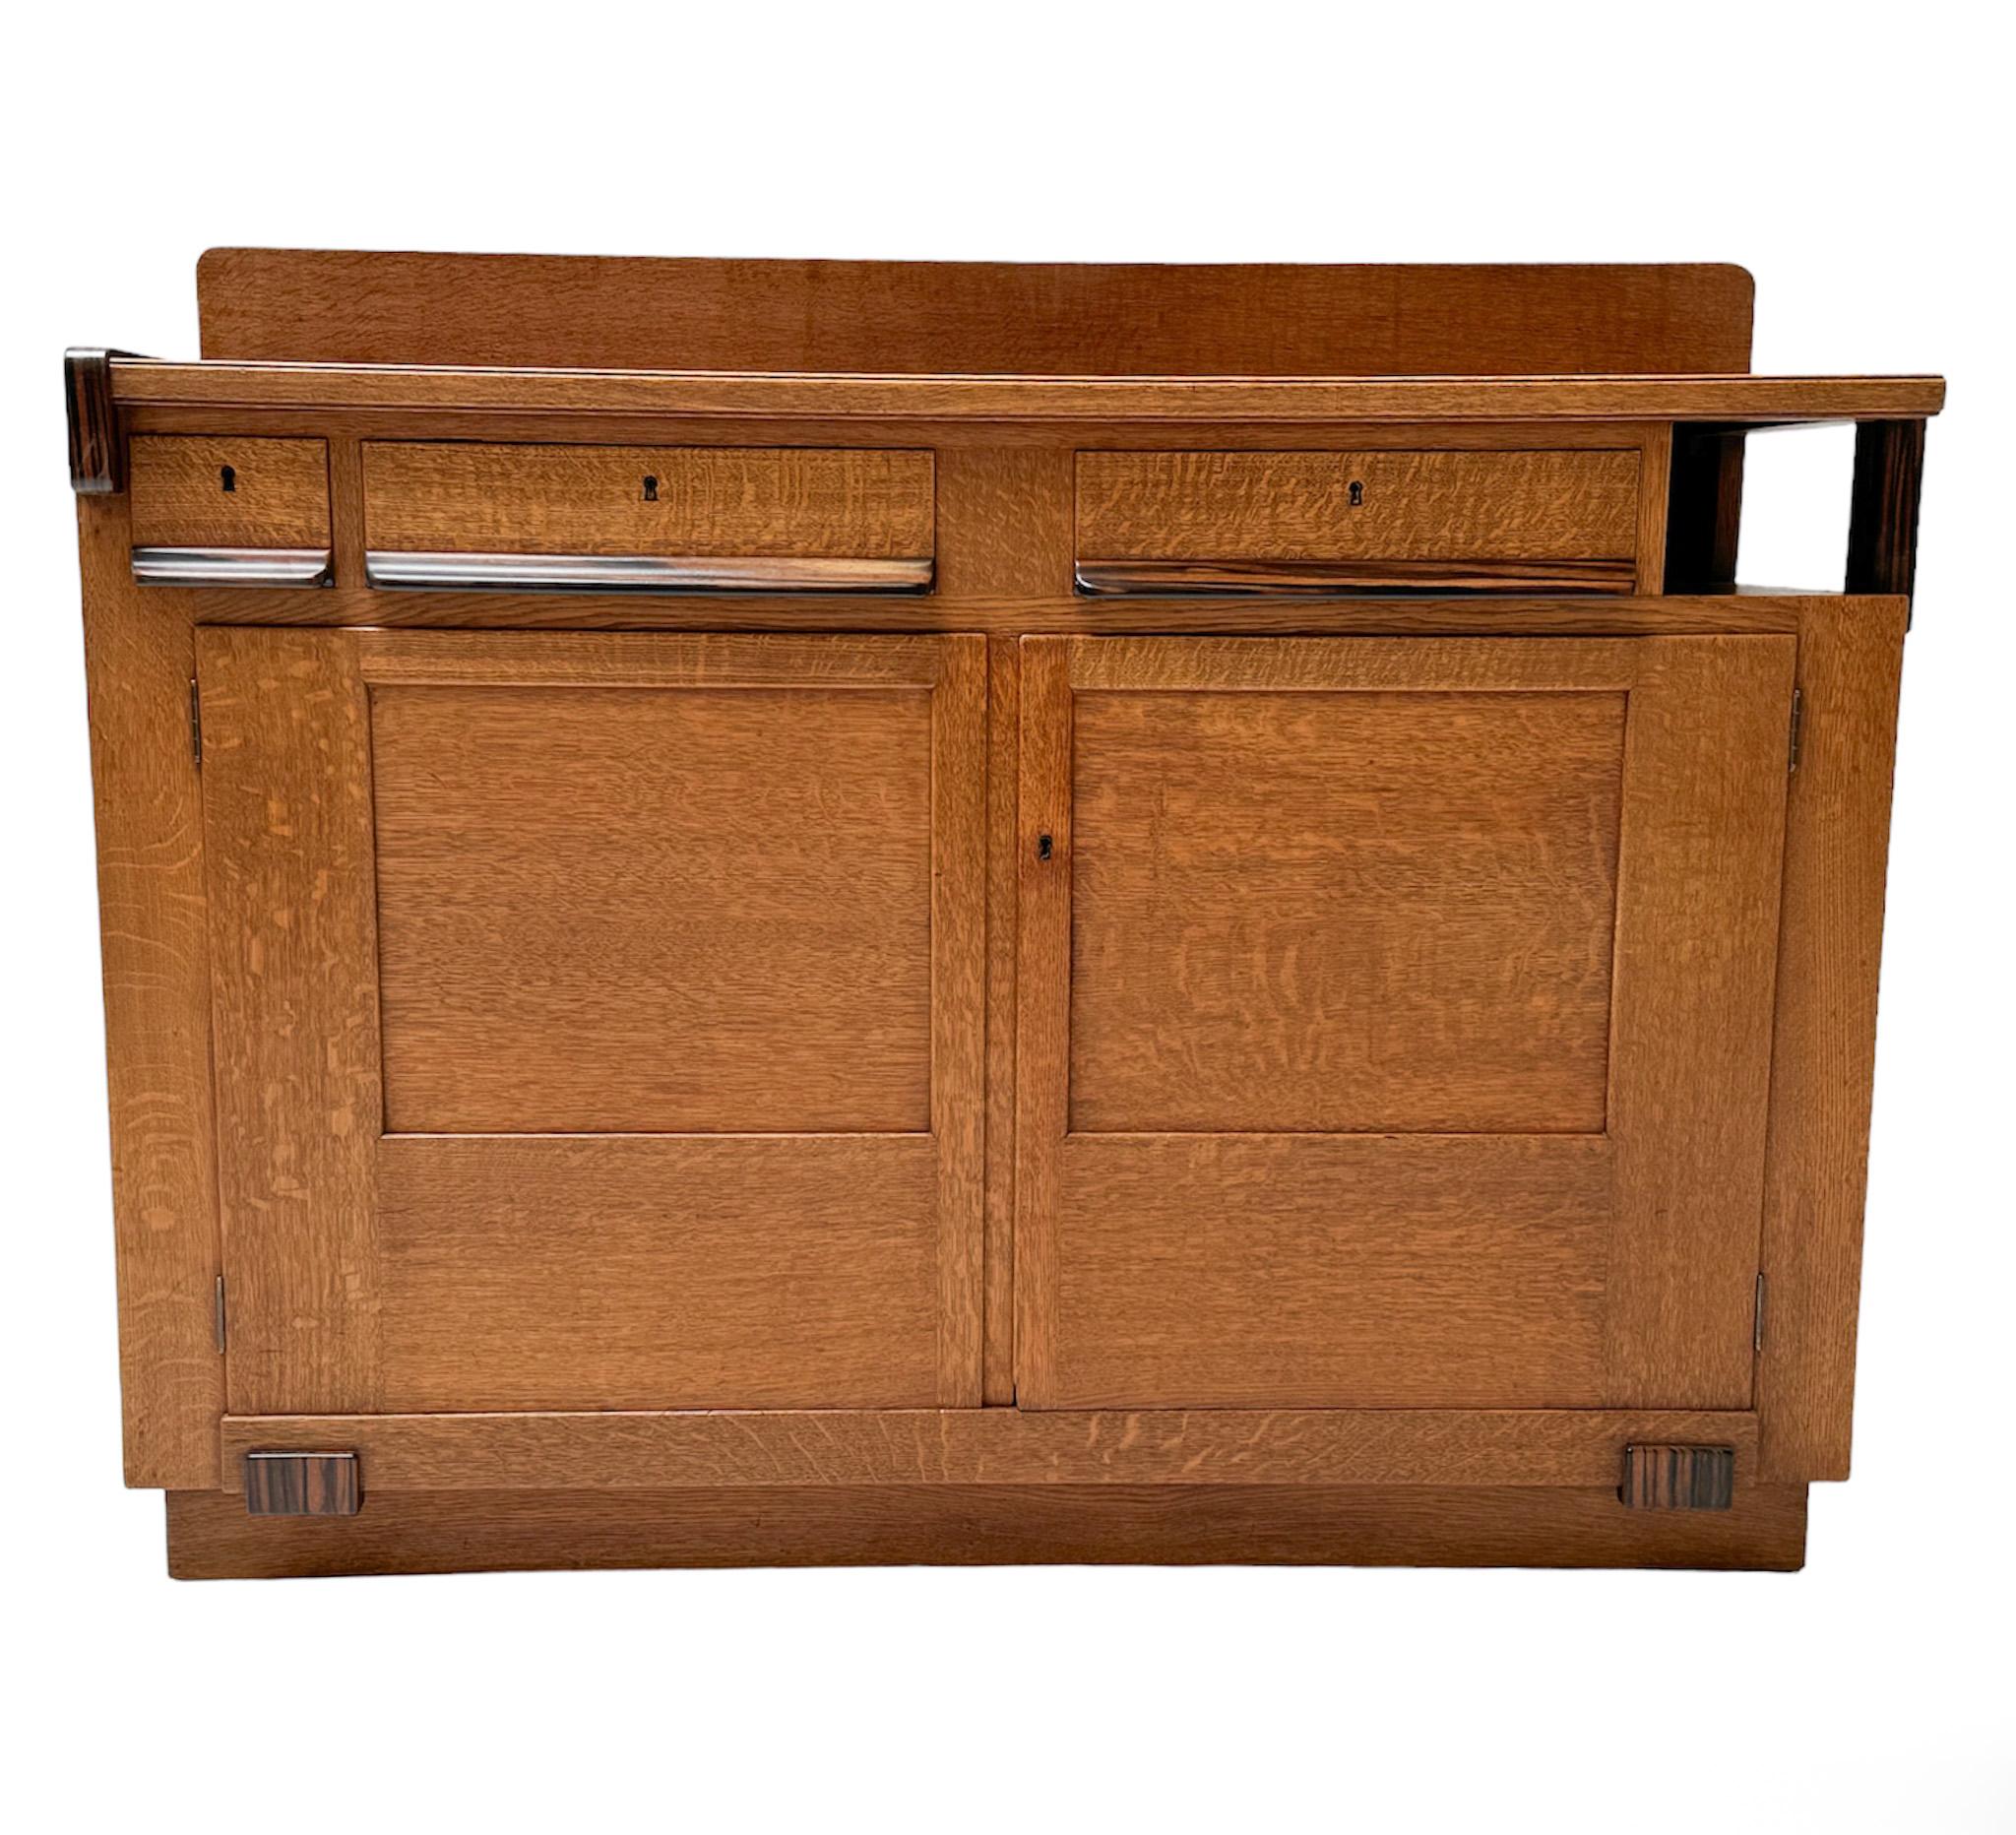 Magnificent and rare Art Deco Modernist credenza or sideboard.
Design by Anton Lucas for N.V. Meubelkunst Leiden.
Striking Dutch design from the 1920s.
Solid oak base with original solid macassar ebony handles on doors and drawers.
In very good